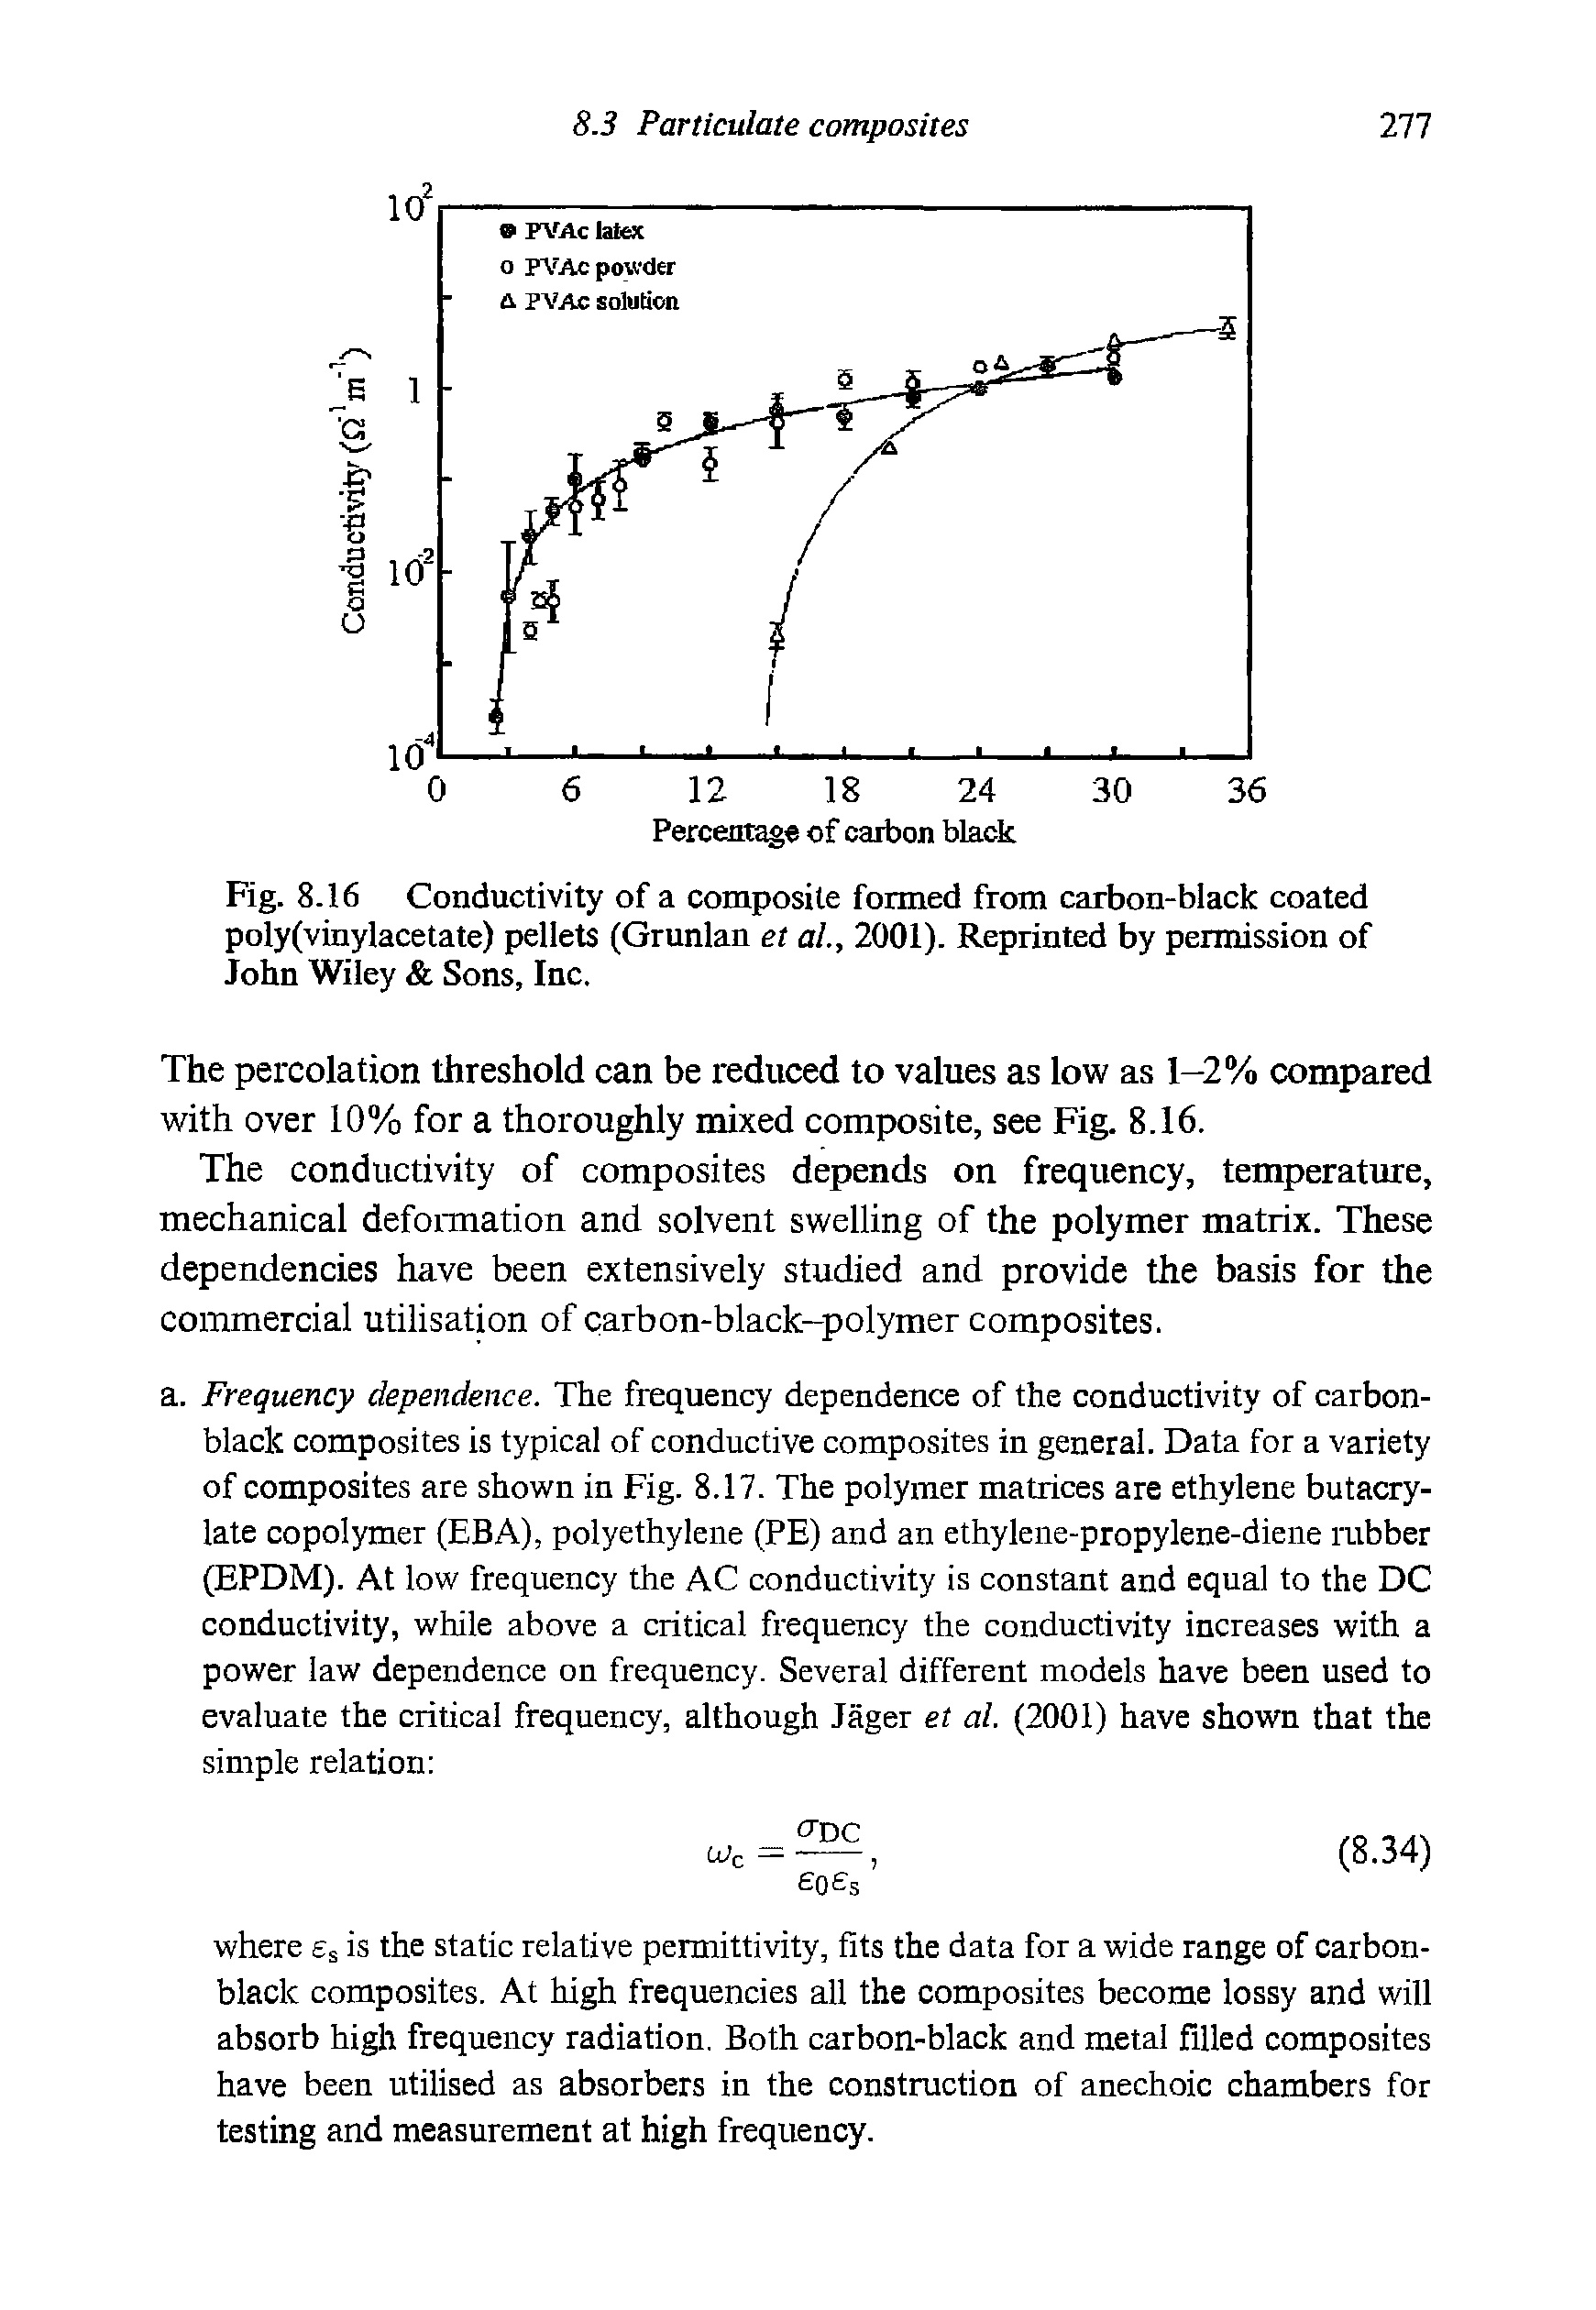 Fig. 8.16 Conductivity of a composite formed from carbon-black coated poly(vinylacetate) pellets (Grunlan et al., 2001). Reprinted by permission of John Wiley Sons, Inc.